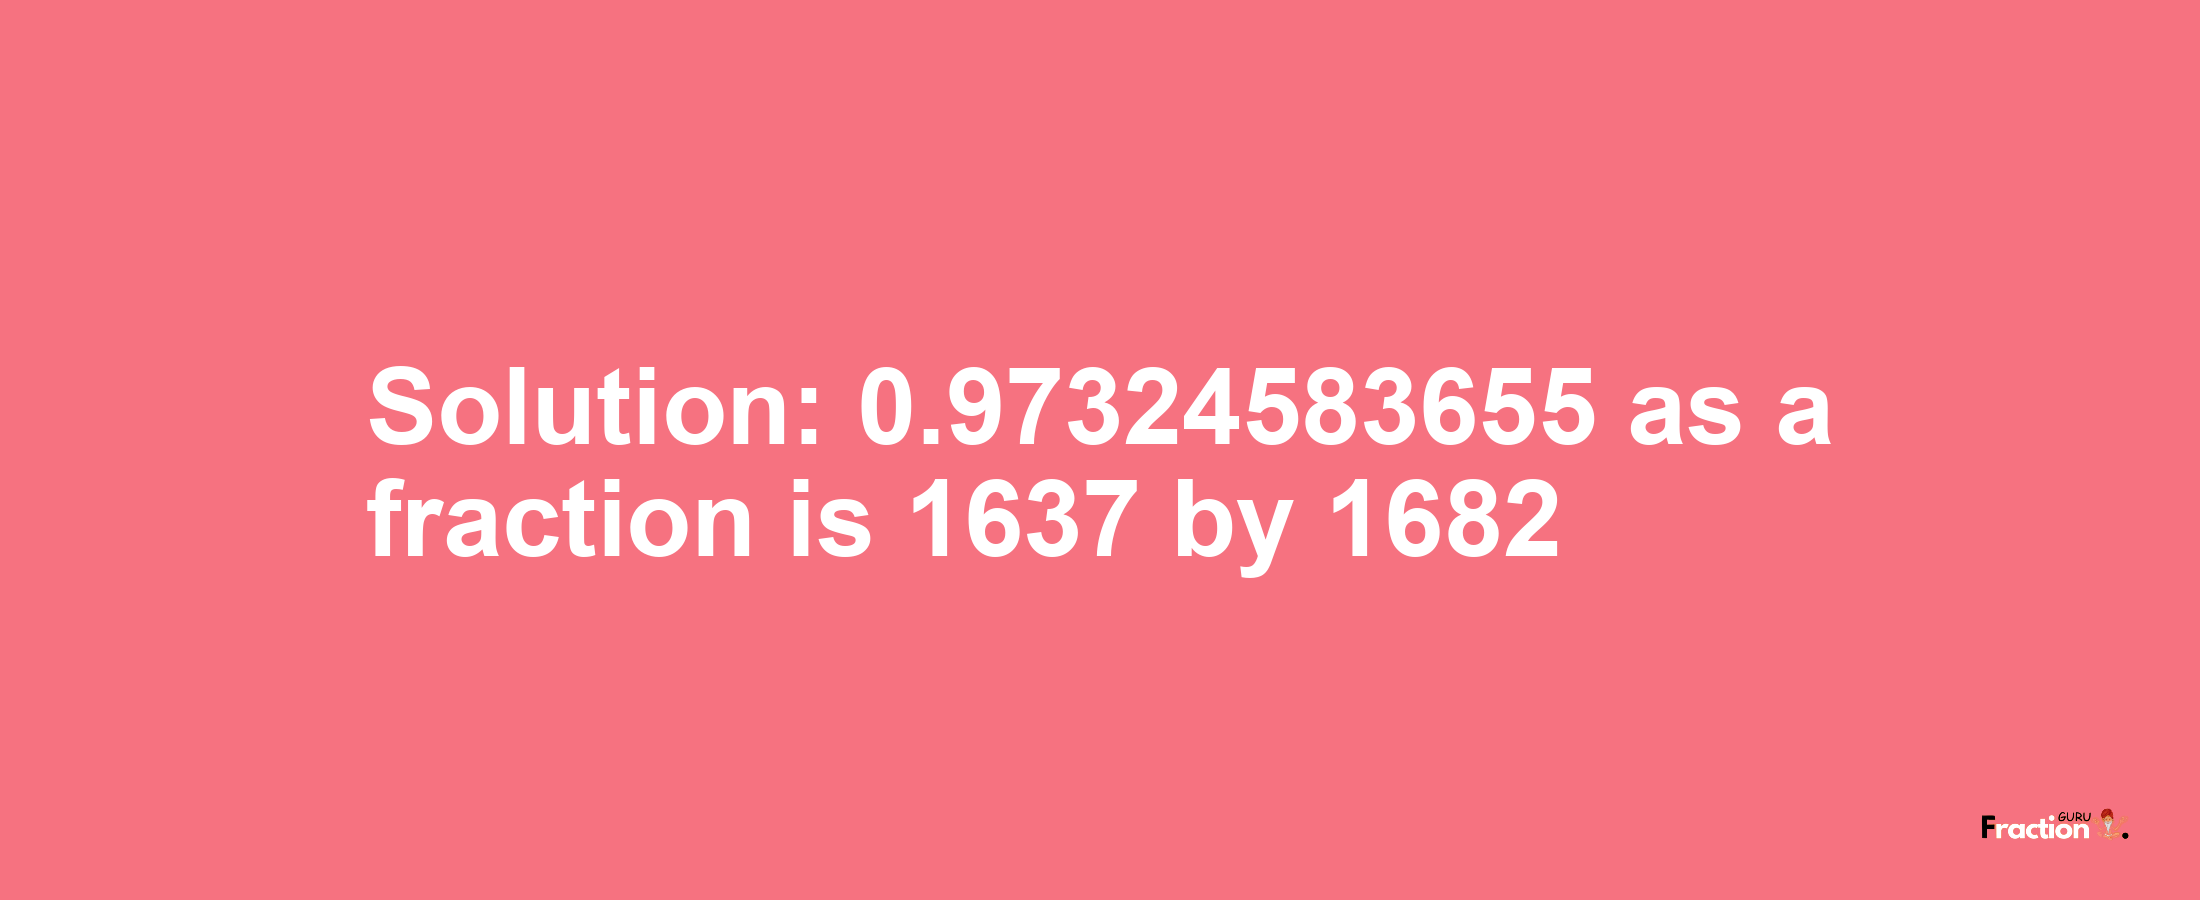 Solution:0.97324583655 as a fraction is 1637/1682